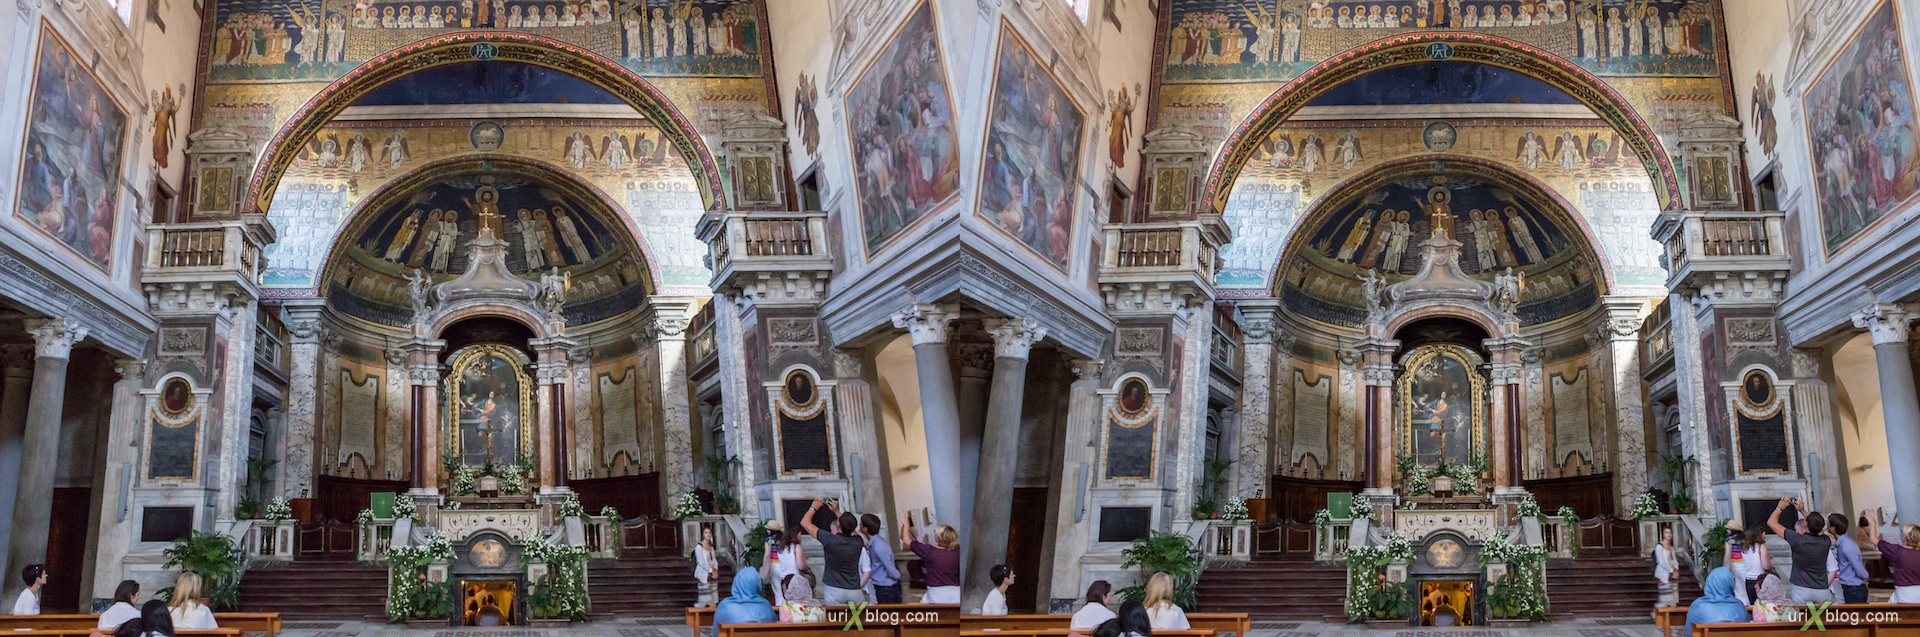 2012, Santa Prassede church, Rome, Italy, cathedral, monastery, Christianity, Catholicism, 3D, stereo pair, cross-eyed, crossview, cross view stereo pair